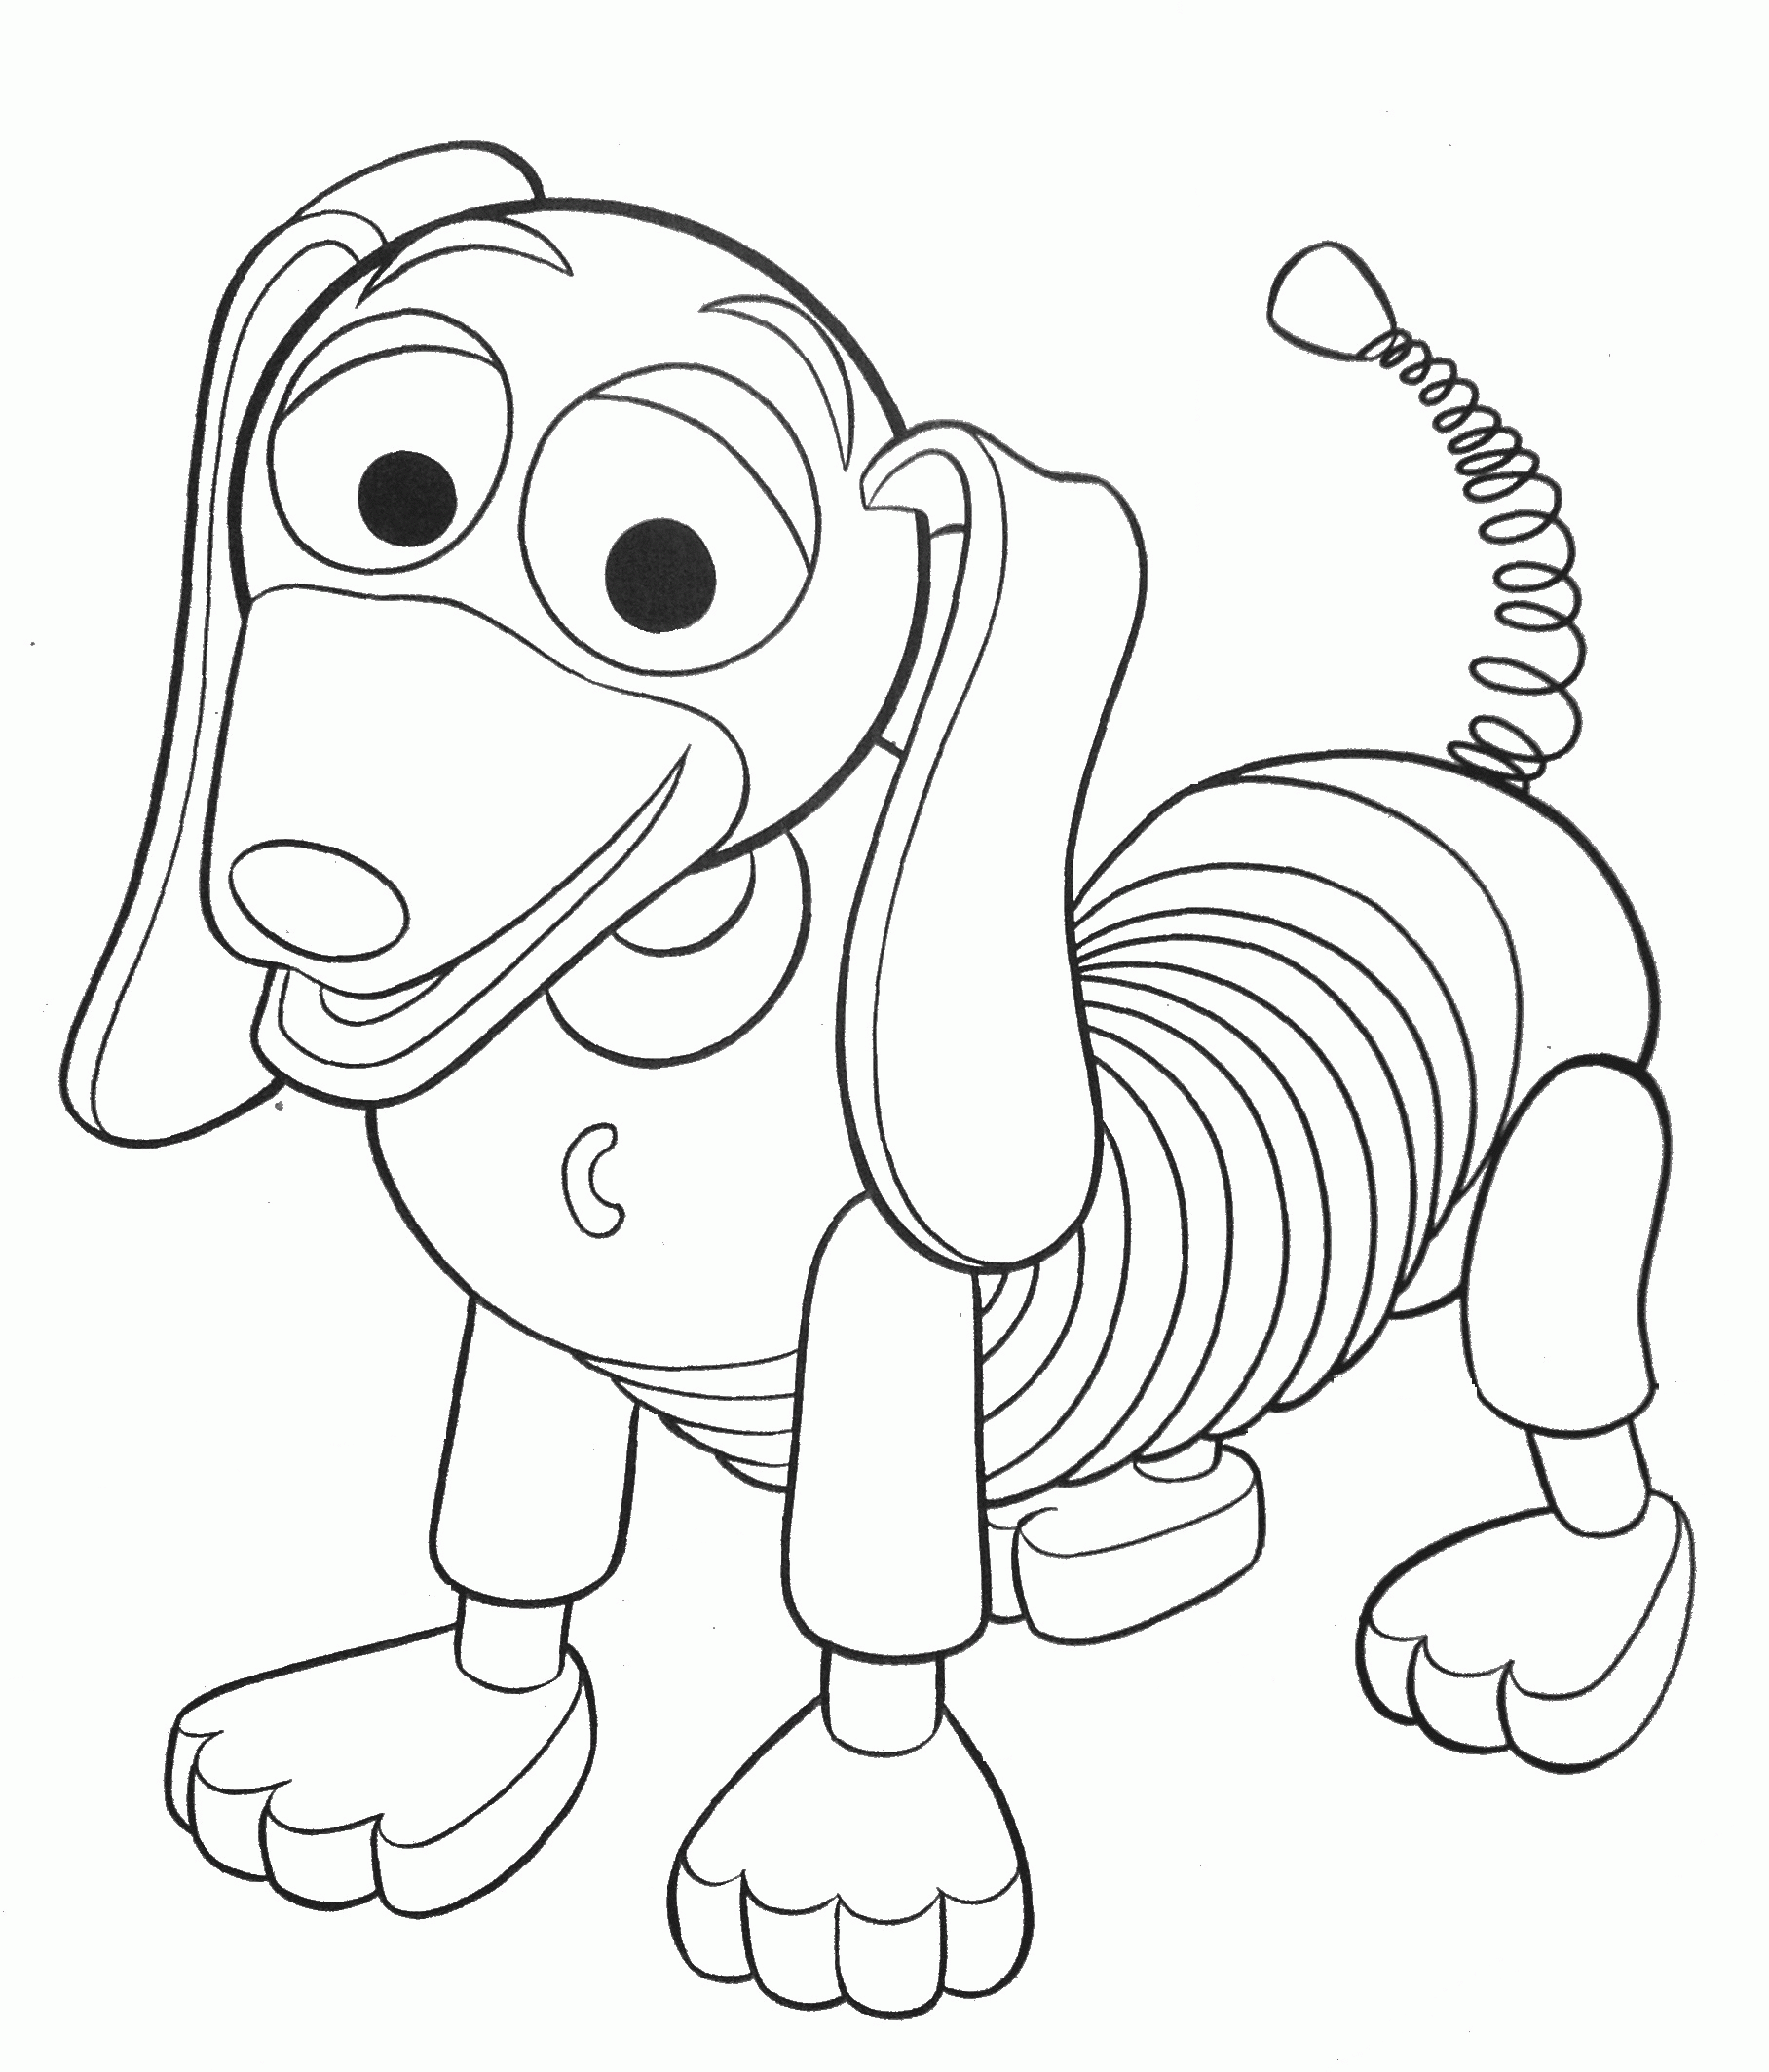 Related Toy Story Coloring Pages item-11716, Toy Story Coloring ...